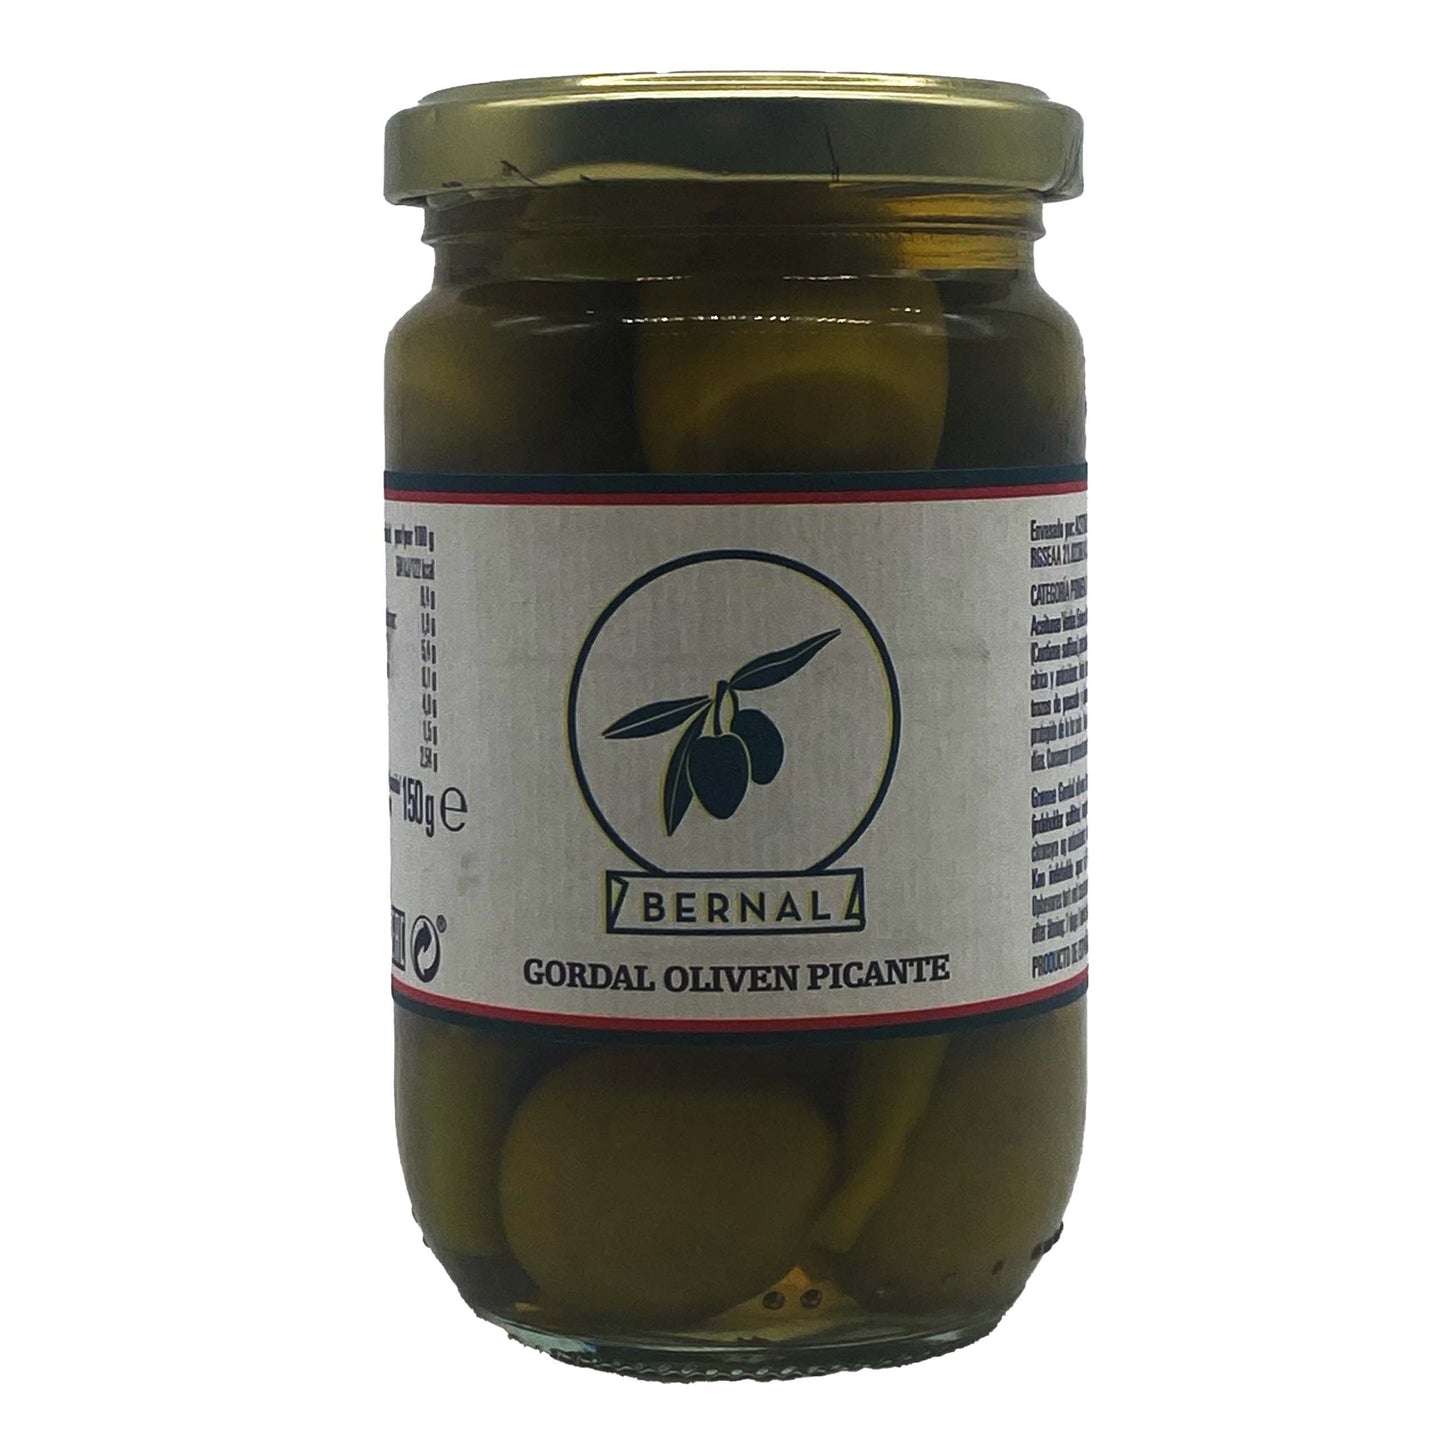 LARGE SPICY OLIVES (GORDAL PICANTE) 150G